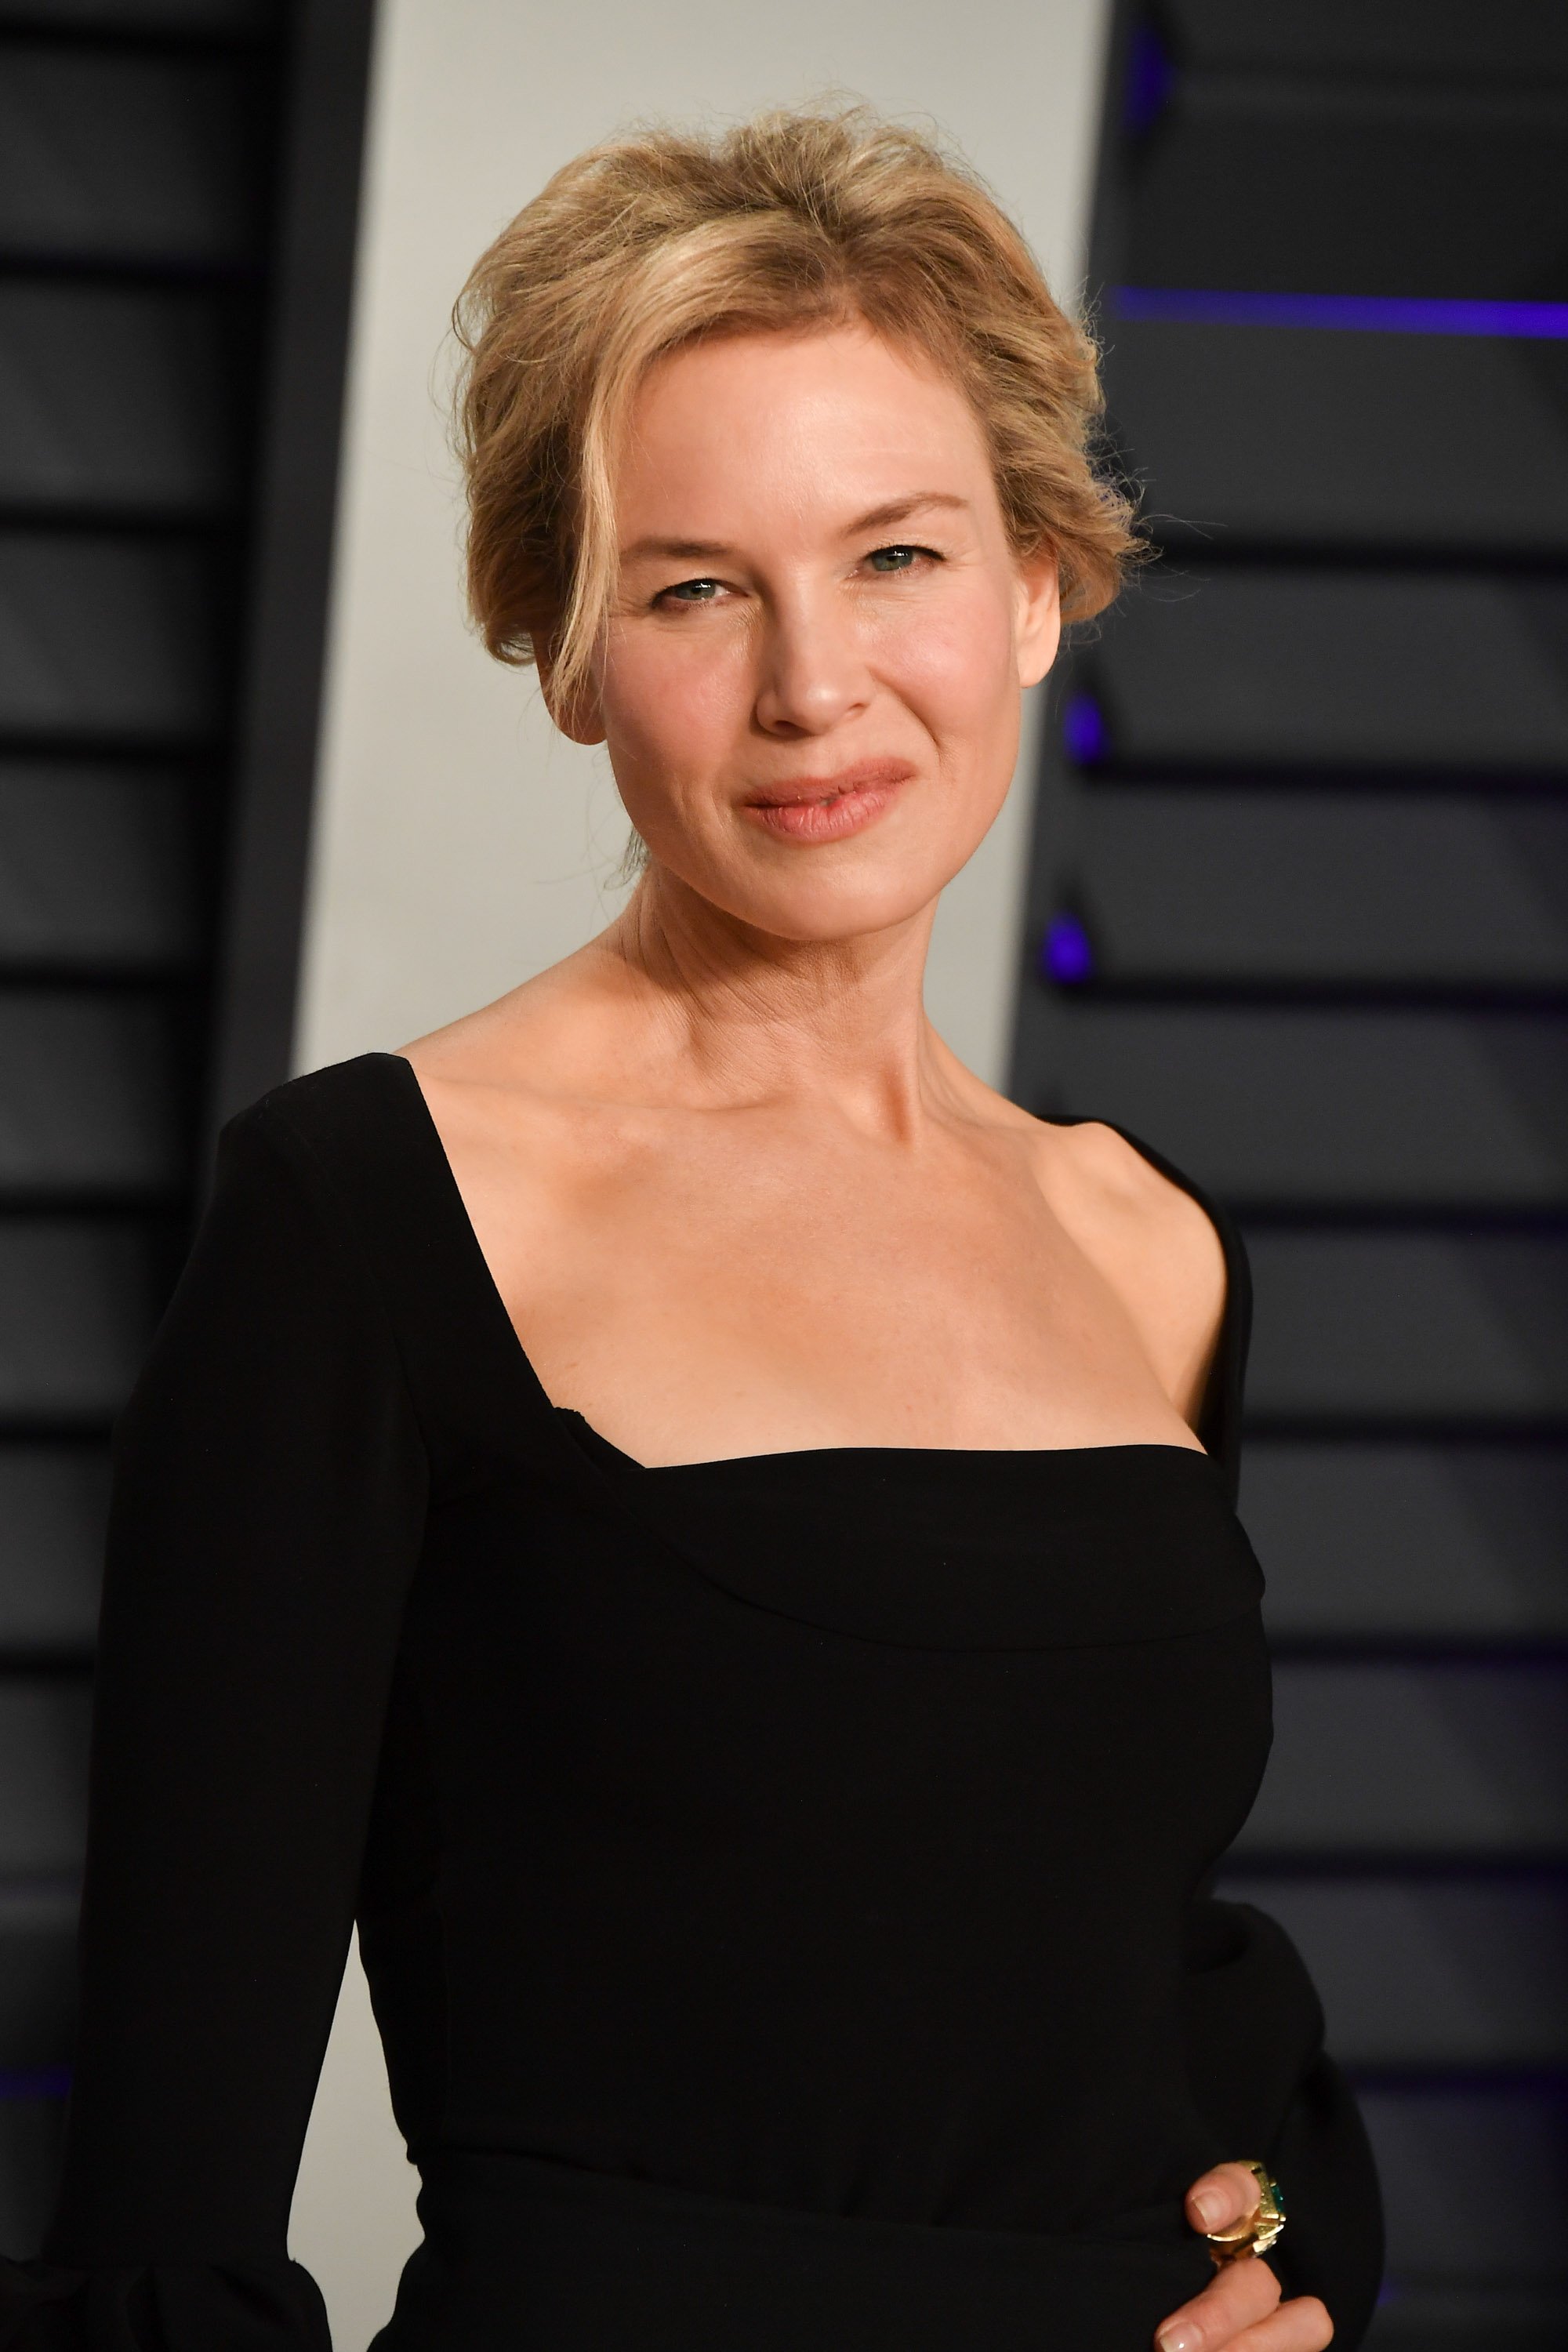 Renee Zellweger attends the 2019 Vanity Fair Oscar Party hosted by Radhika Jones at Wallis Annenberg Center for the Performing Arts on February 24, 2019, in Beverly Hills, California. | Source: Getty Images.